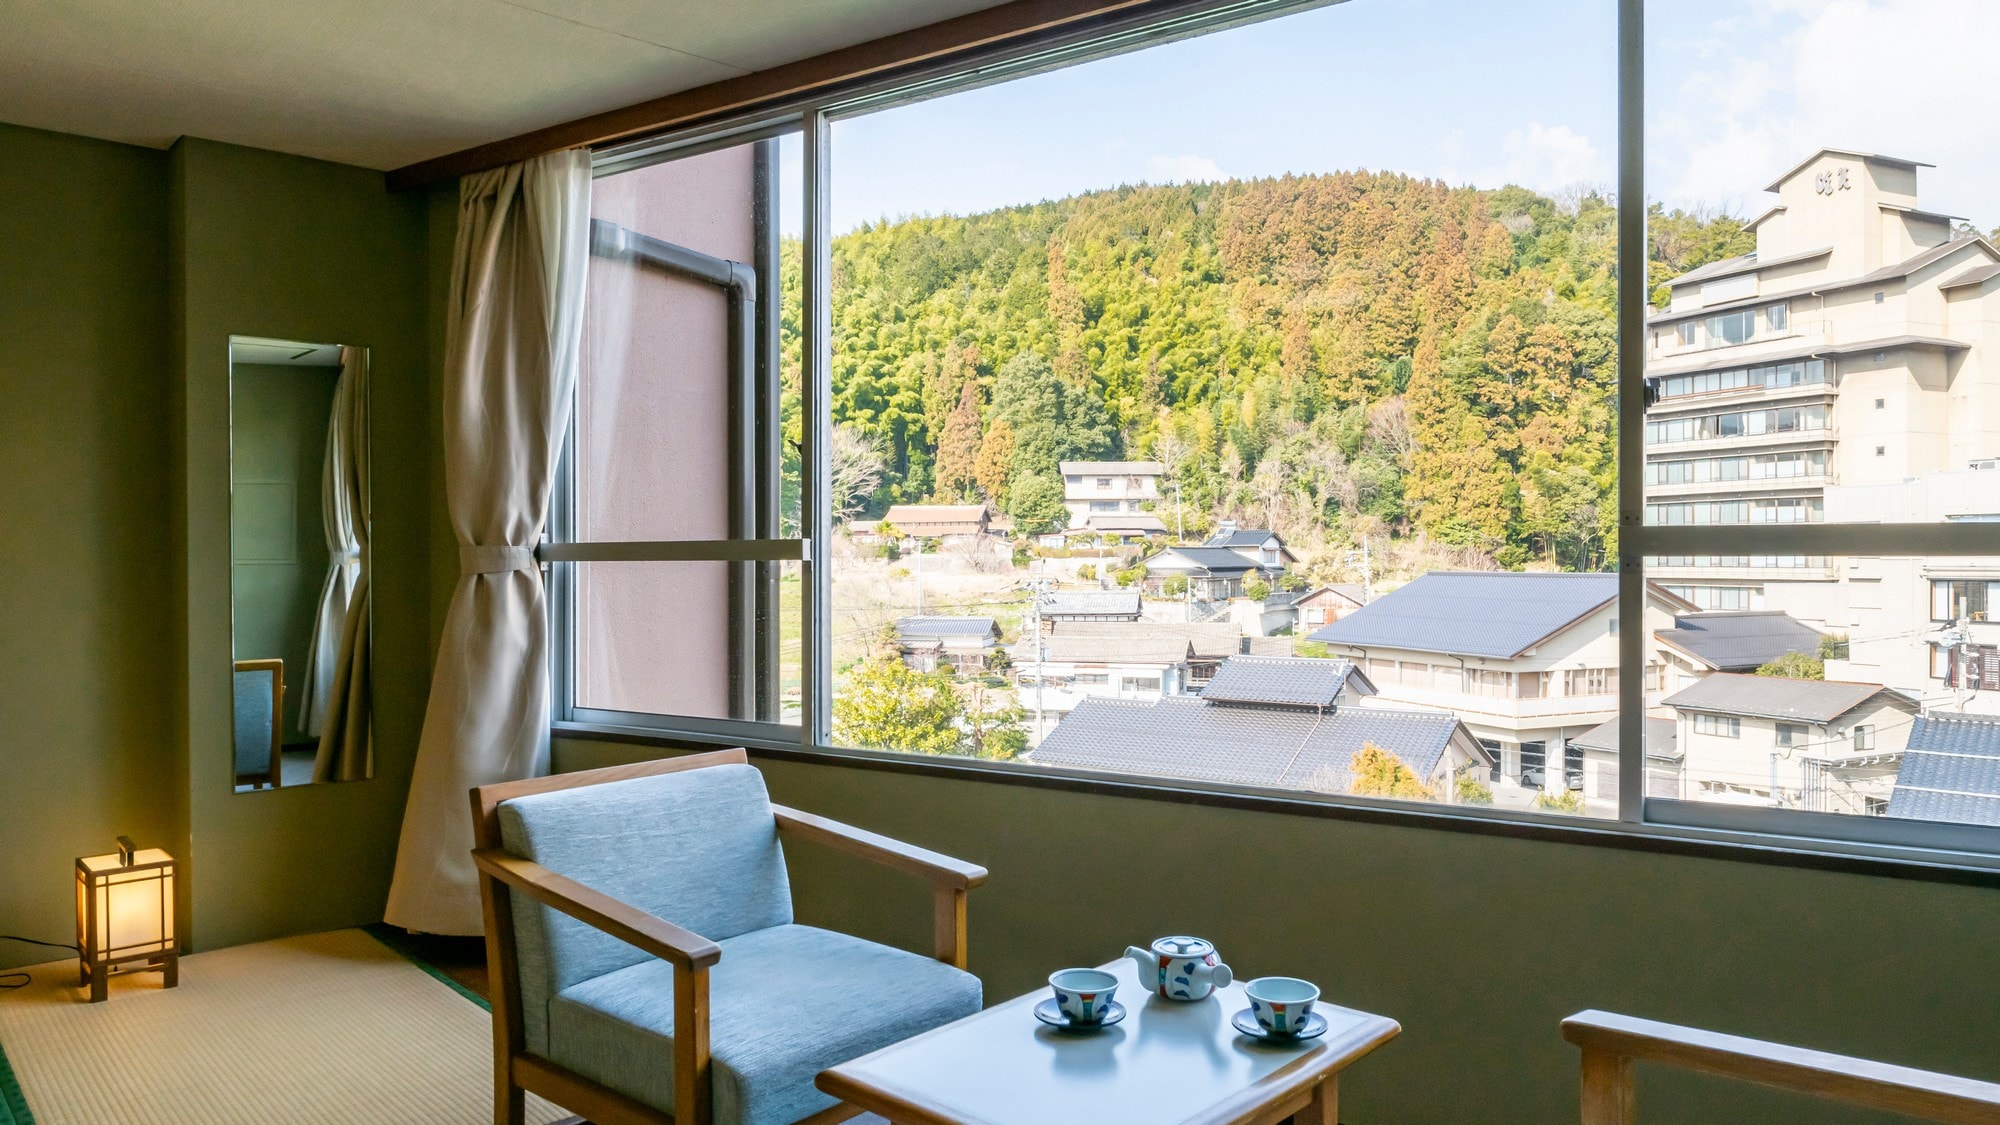 You can overlook the cityscape of the hot spring town from the window. Standard Japanese-style room